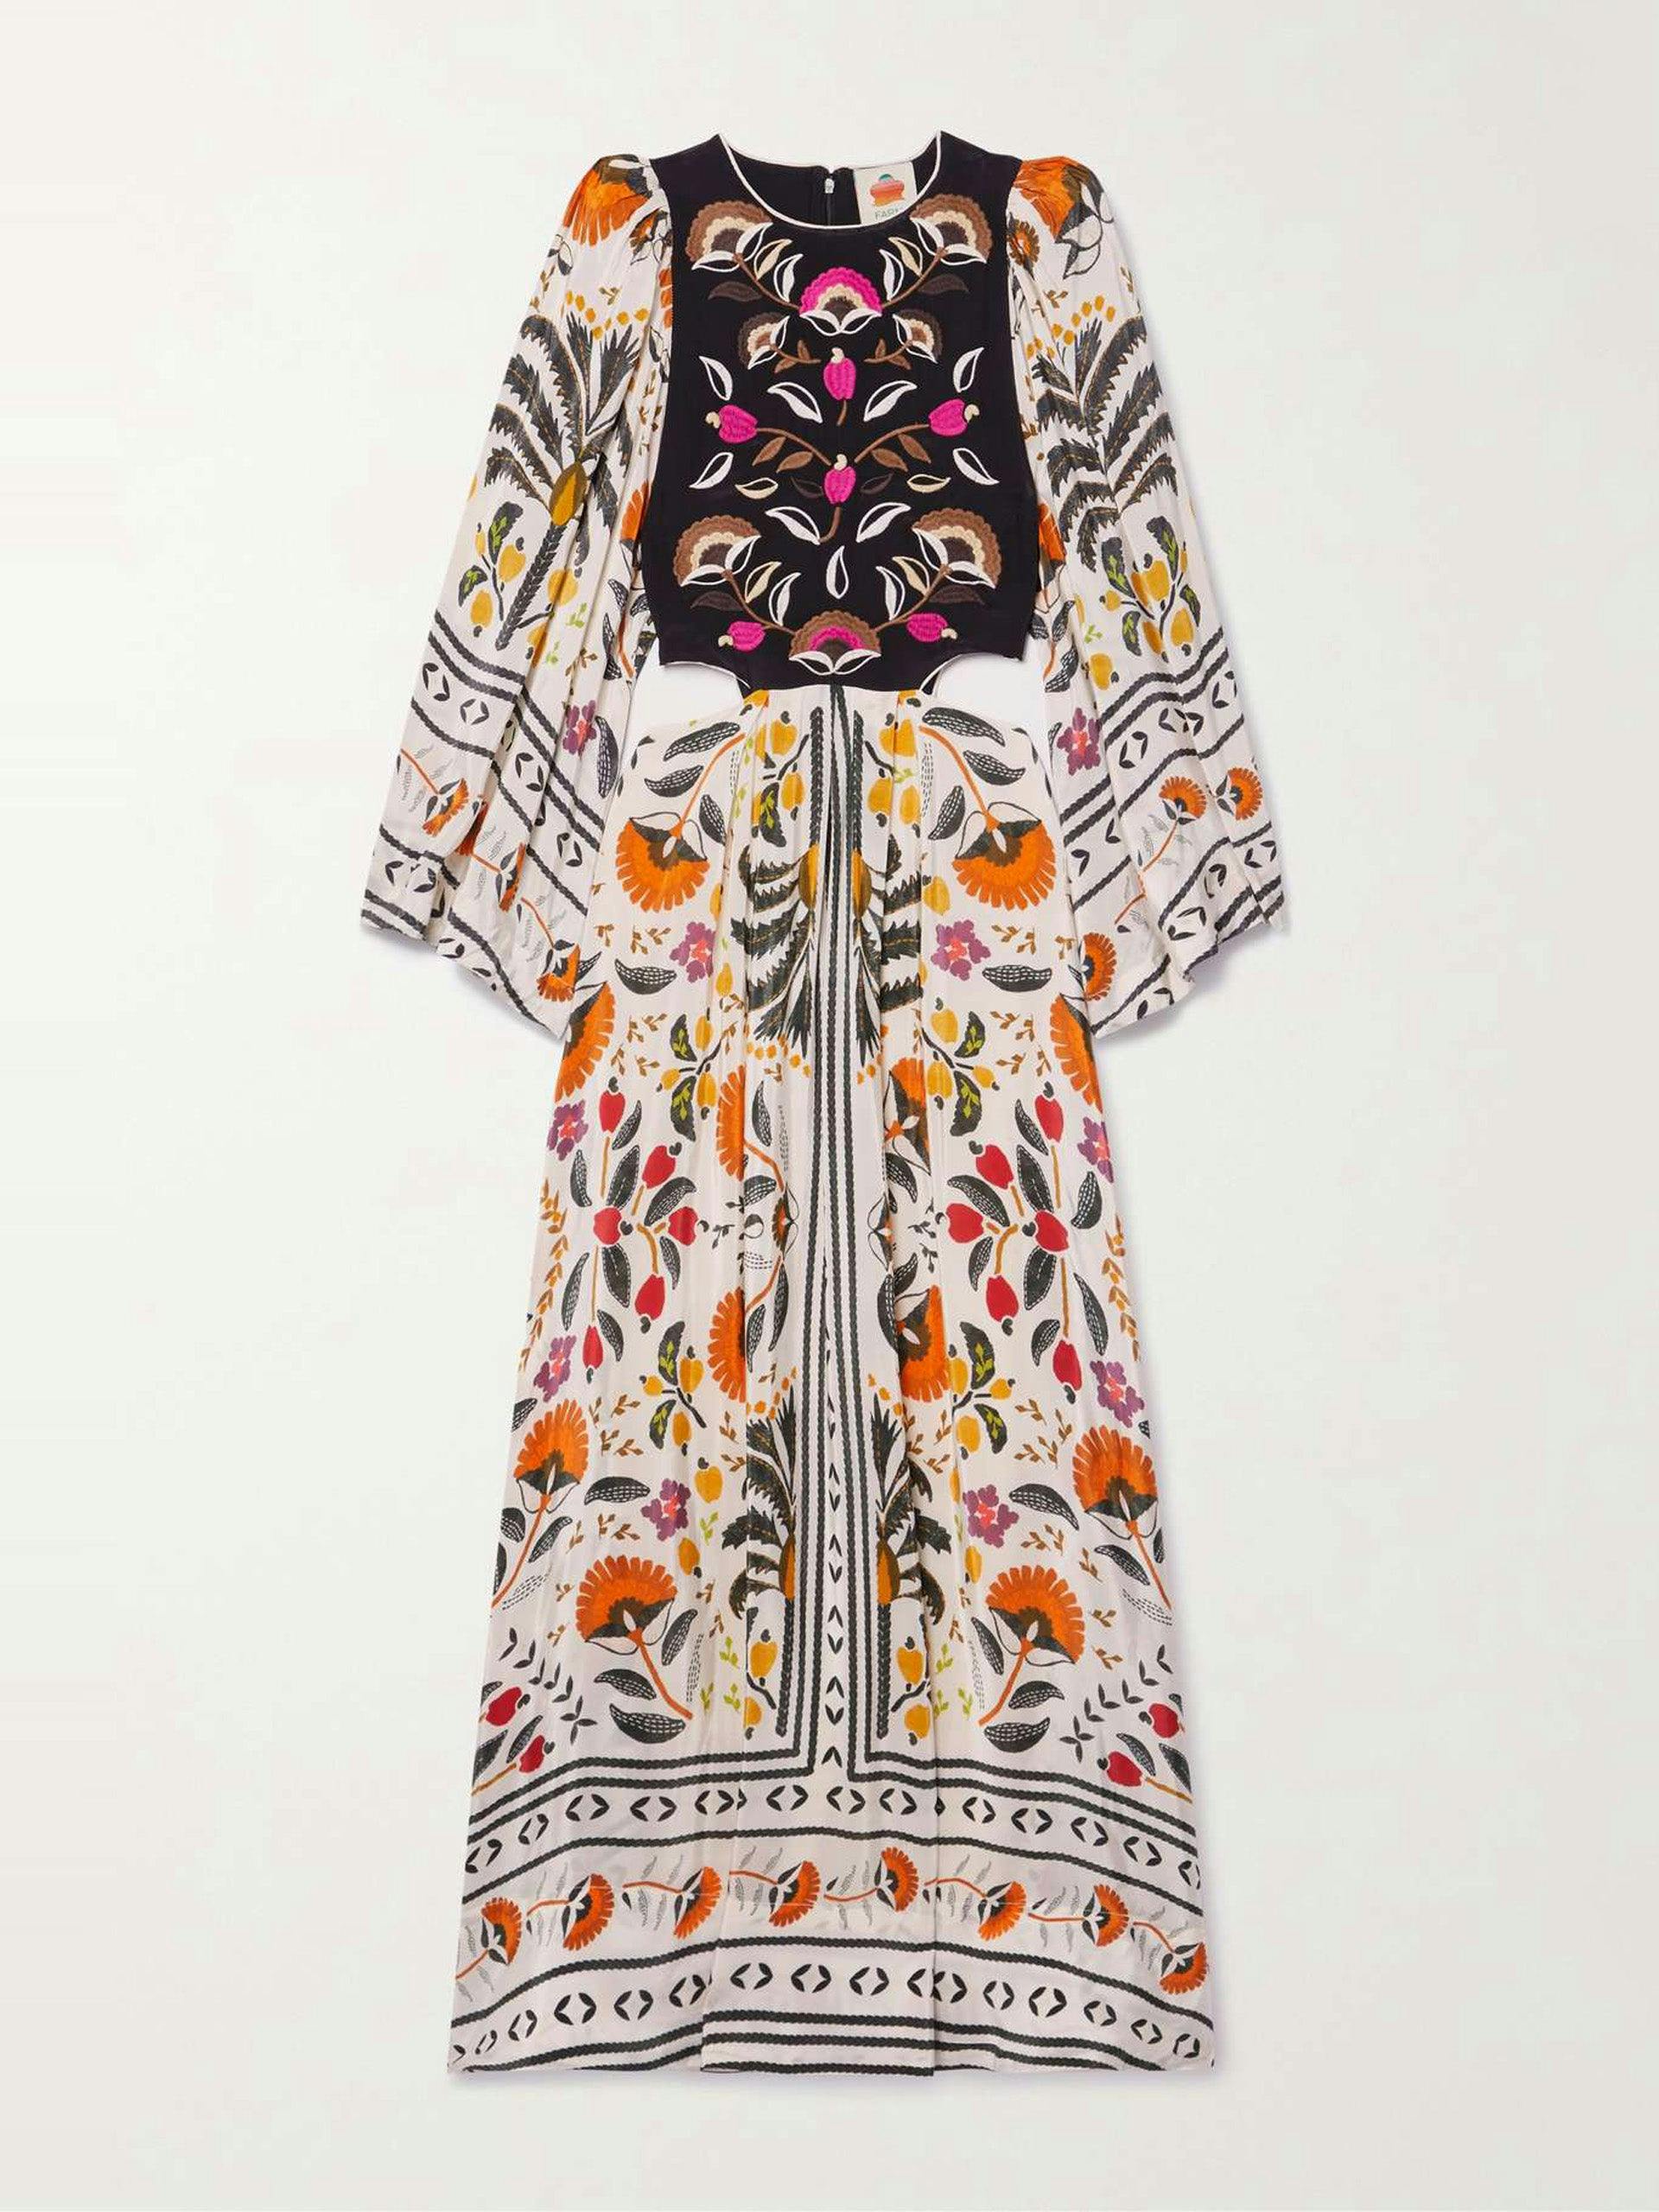 Cutout embroidered printed crepe de chine maxi dress